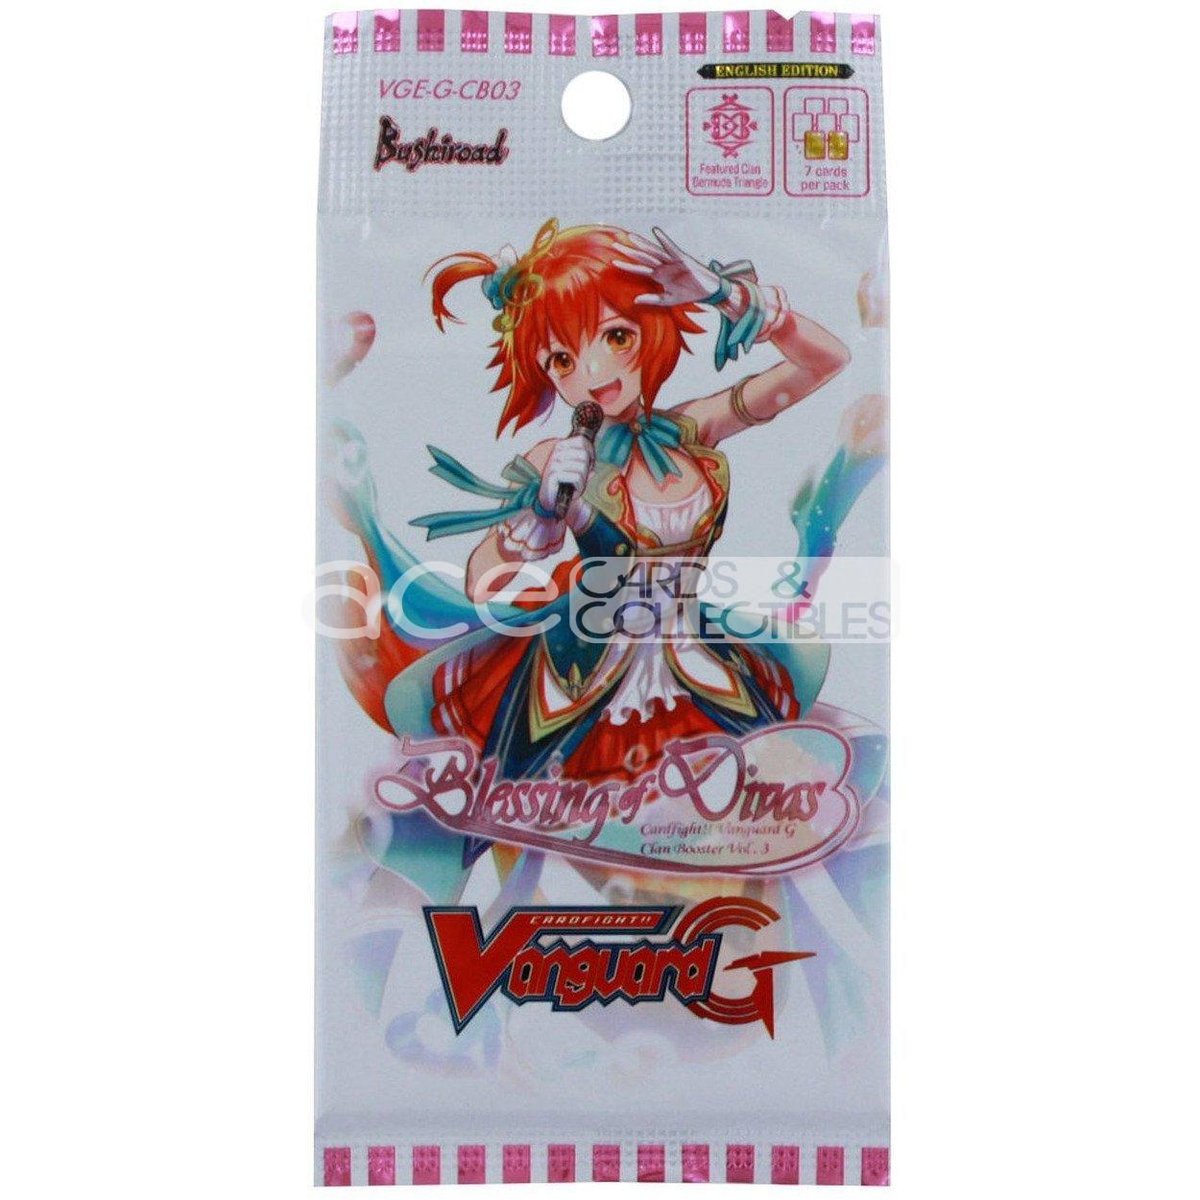 Cardfight Vanguard G Blessing of Divas [VGE-G-CB03] (English)-Single Pack (Random)-Bushiroad-Ace Cards & Collectibles